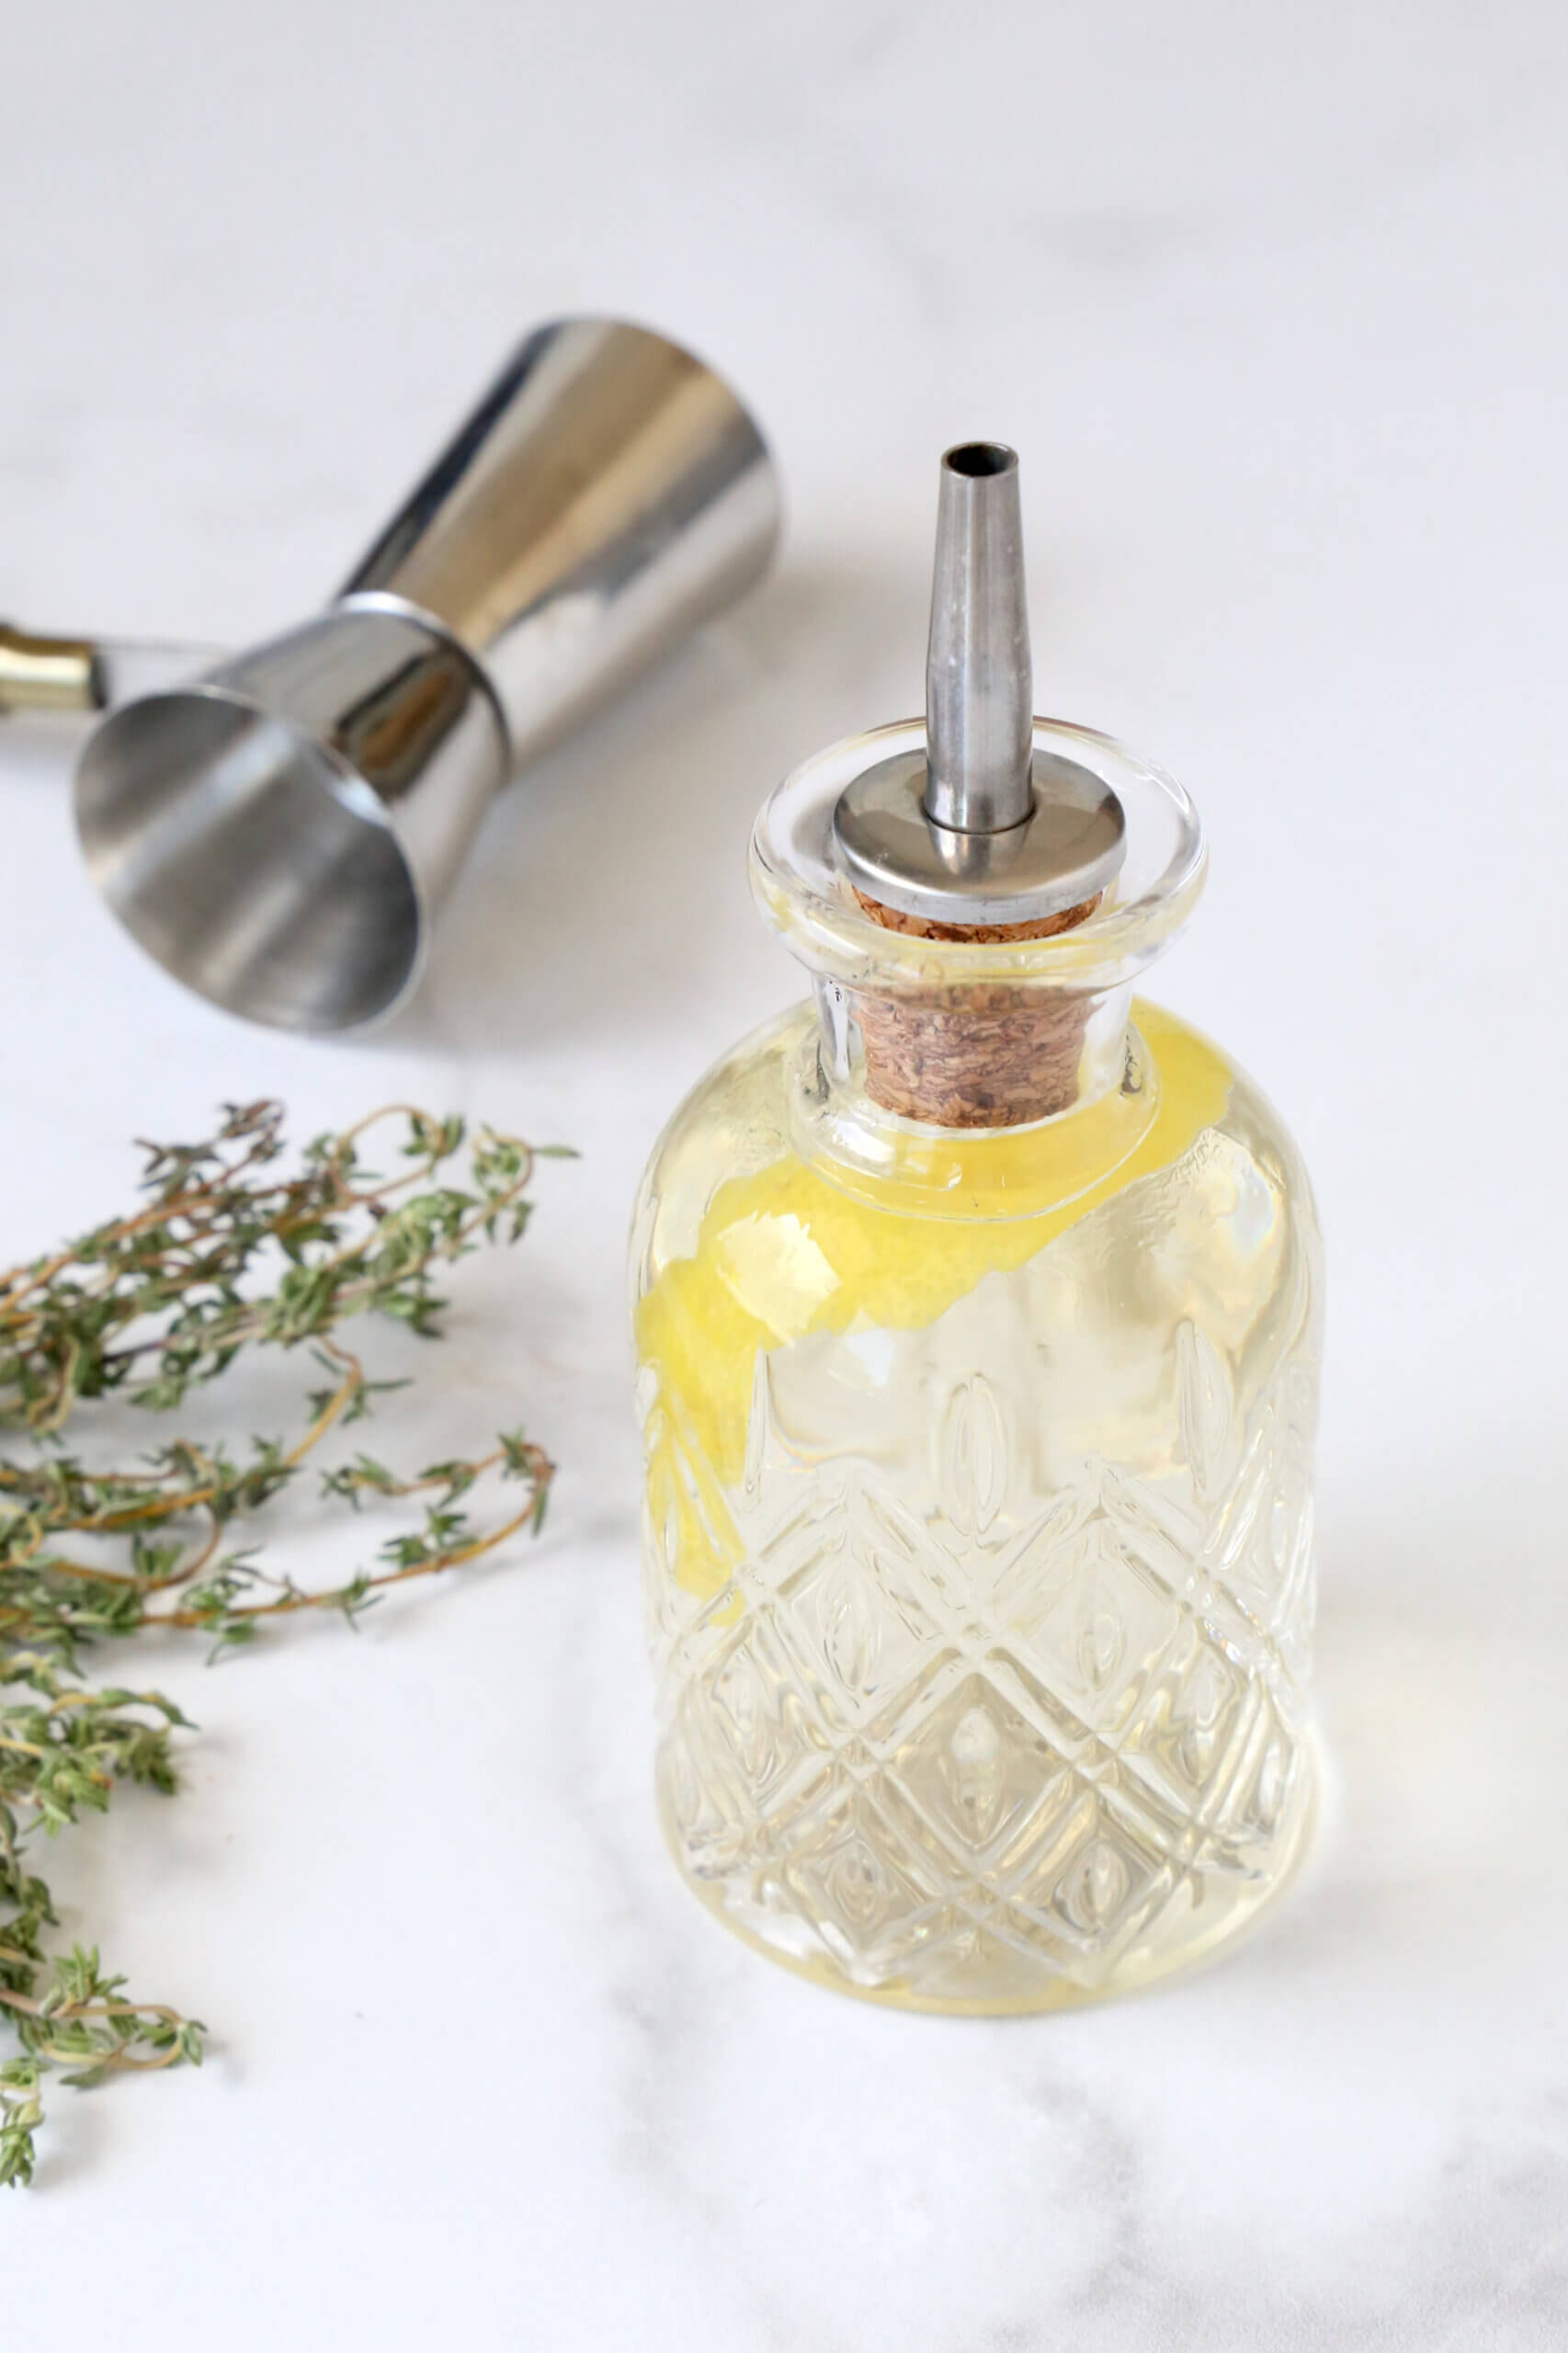 A crystal cut glass jar with a spout, filled with a liquid and a lemon peel.  